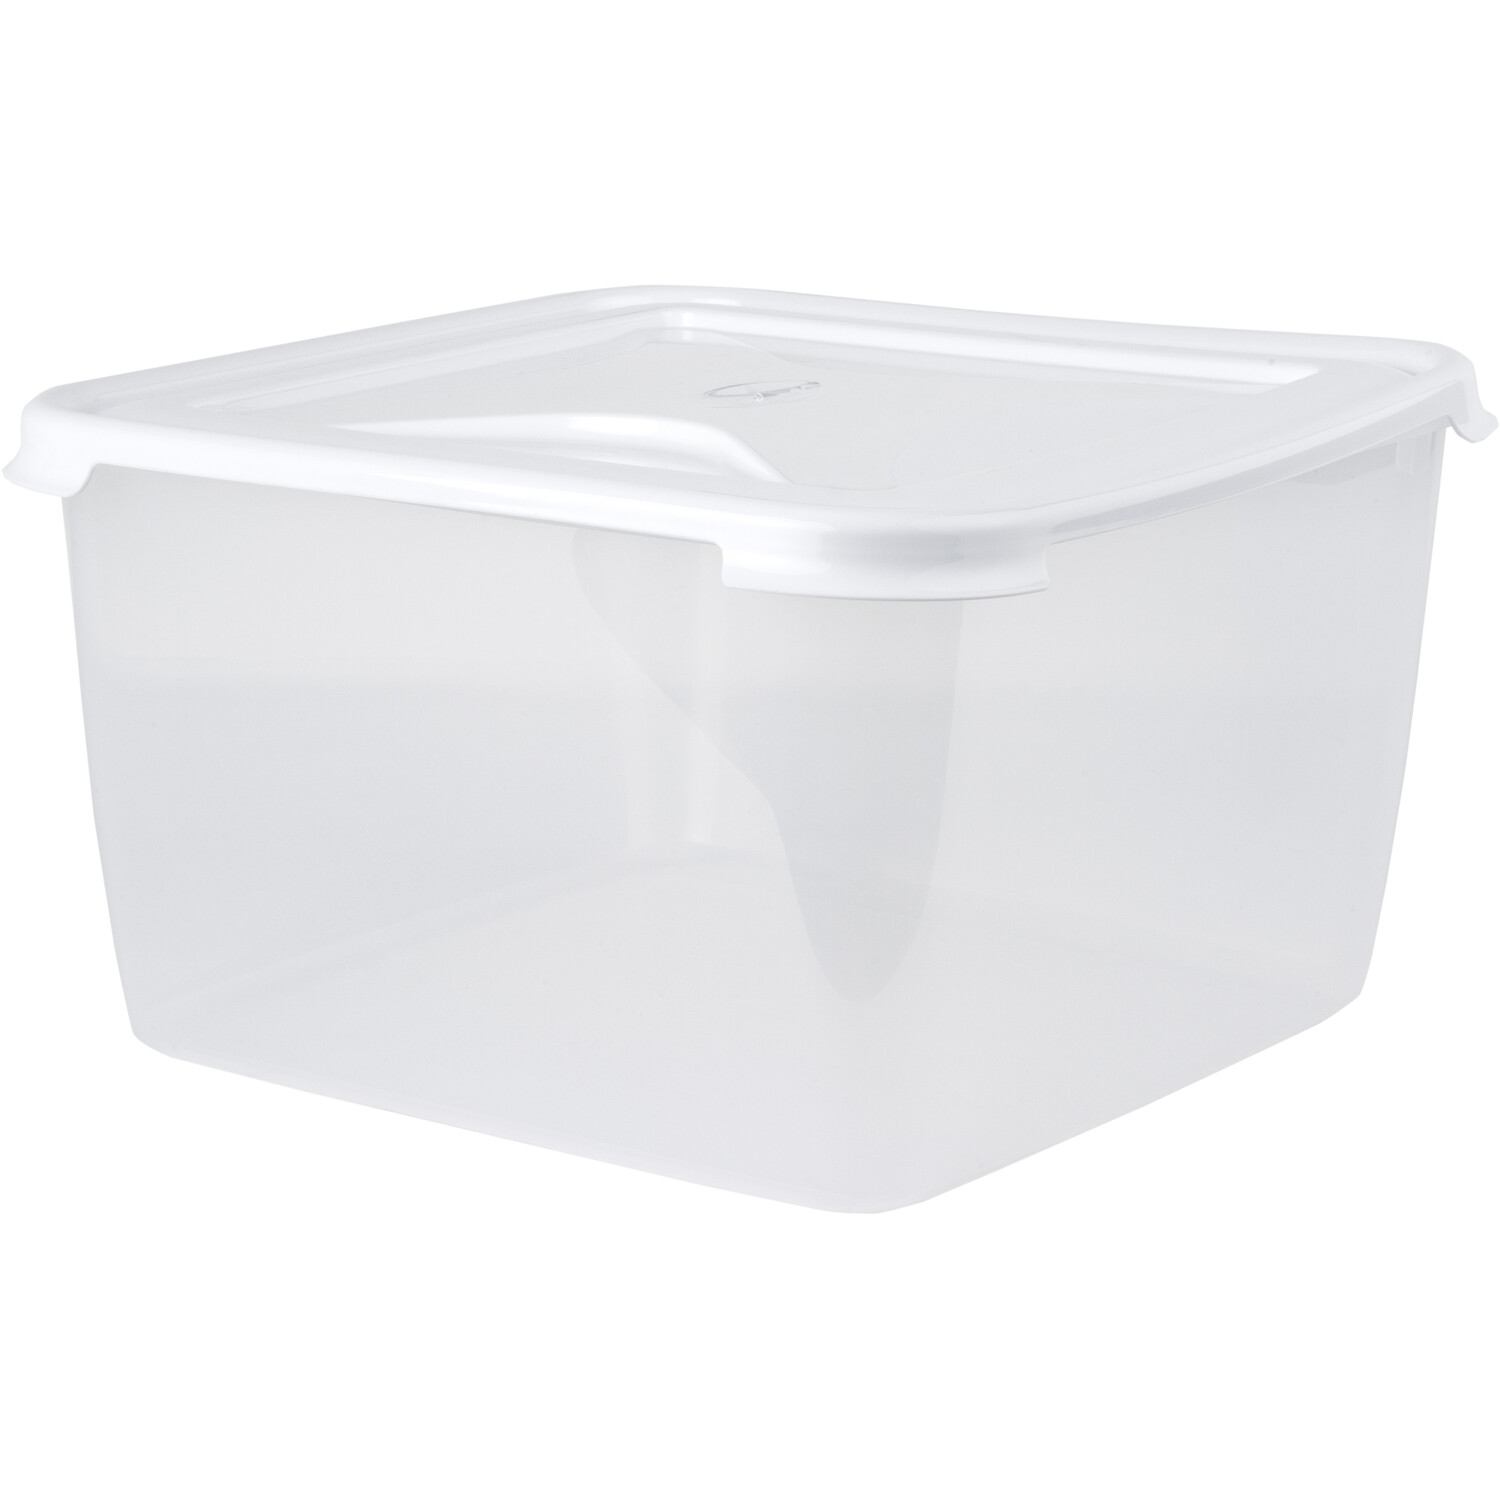 Wham 15L Square Food Container with Lid Image